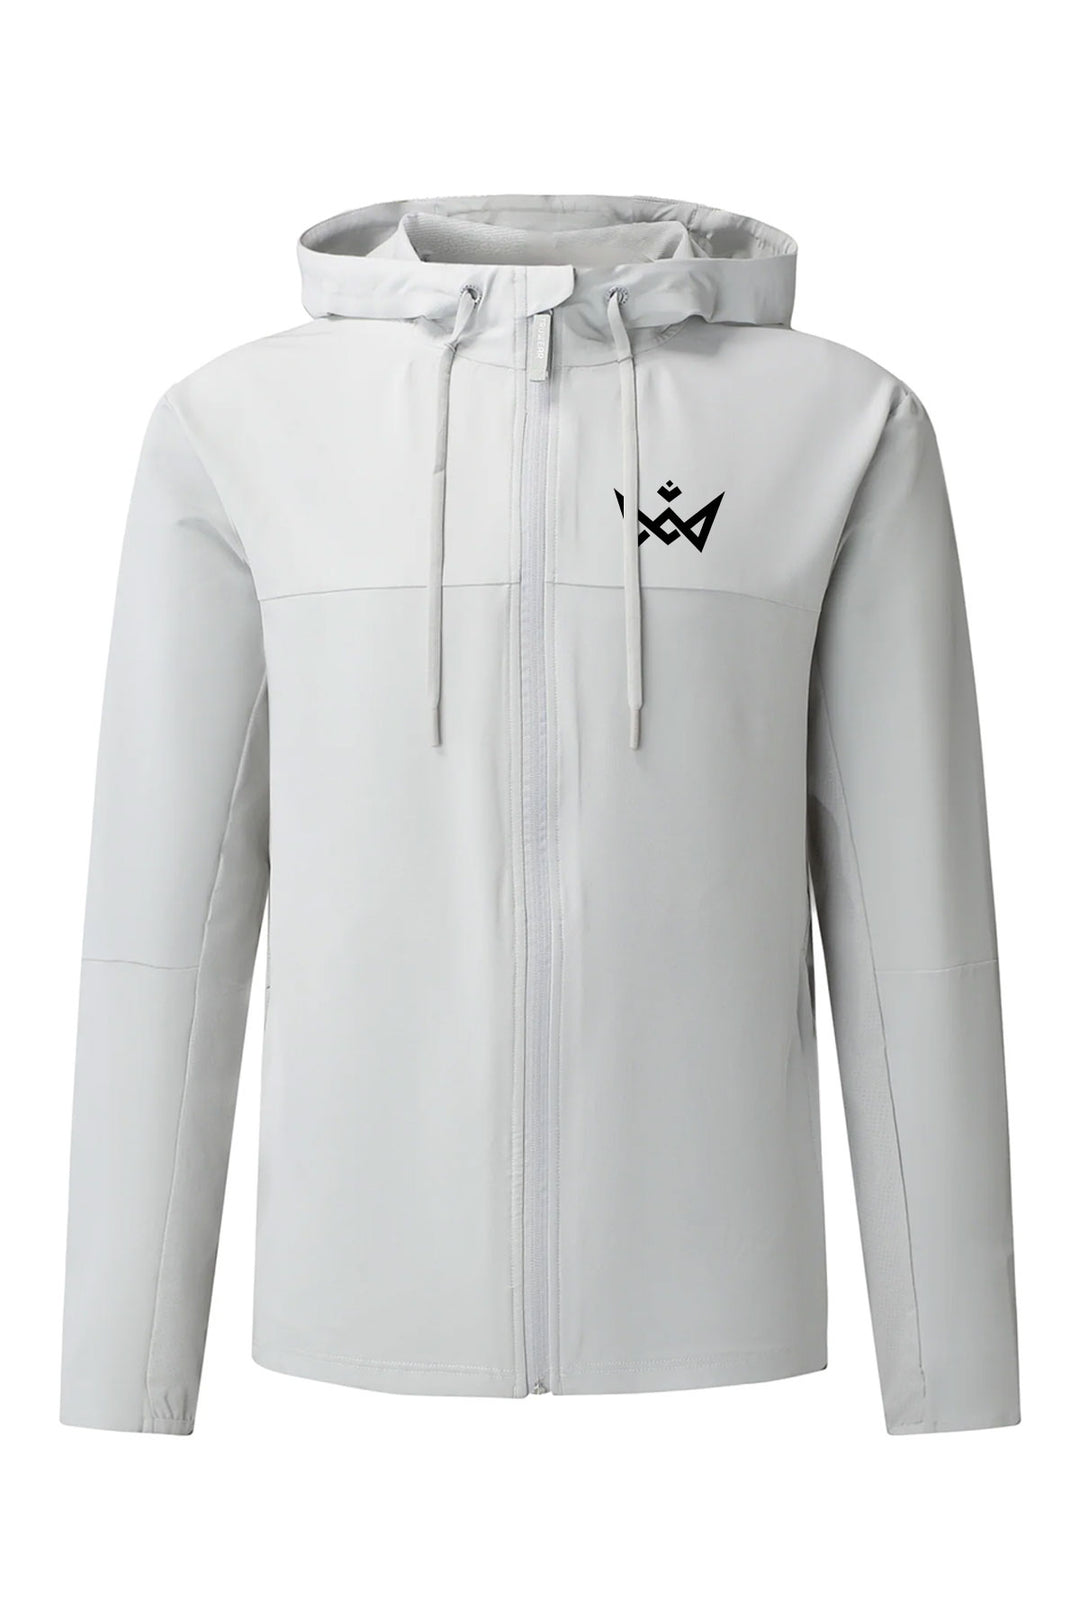 Expedition Performance Fabric Jacket